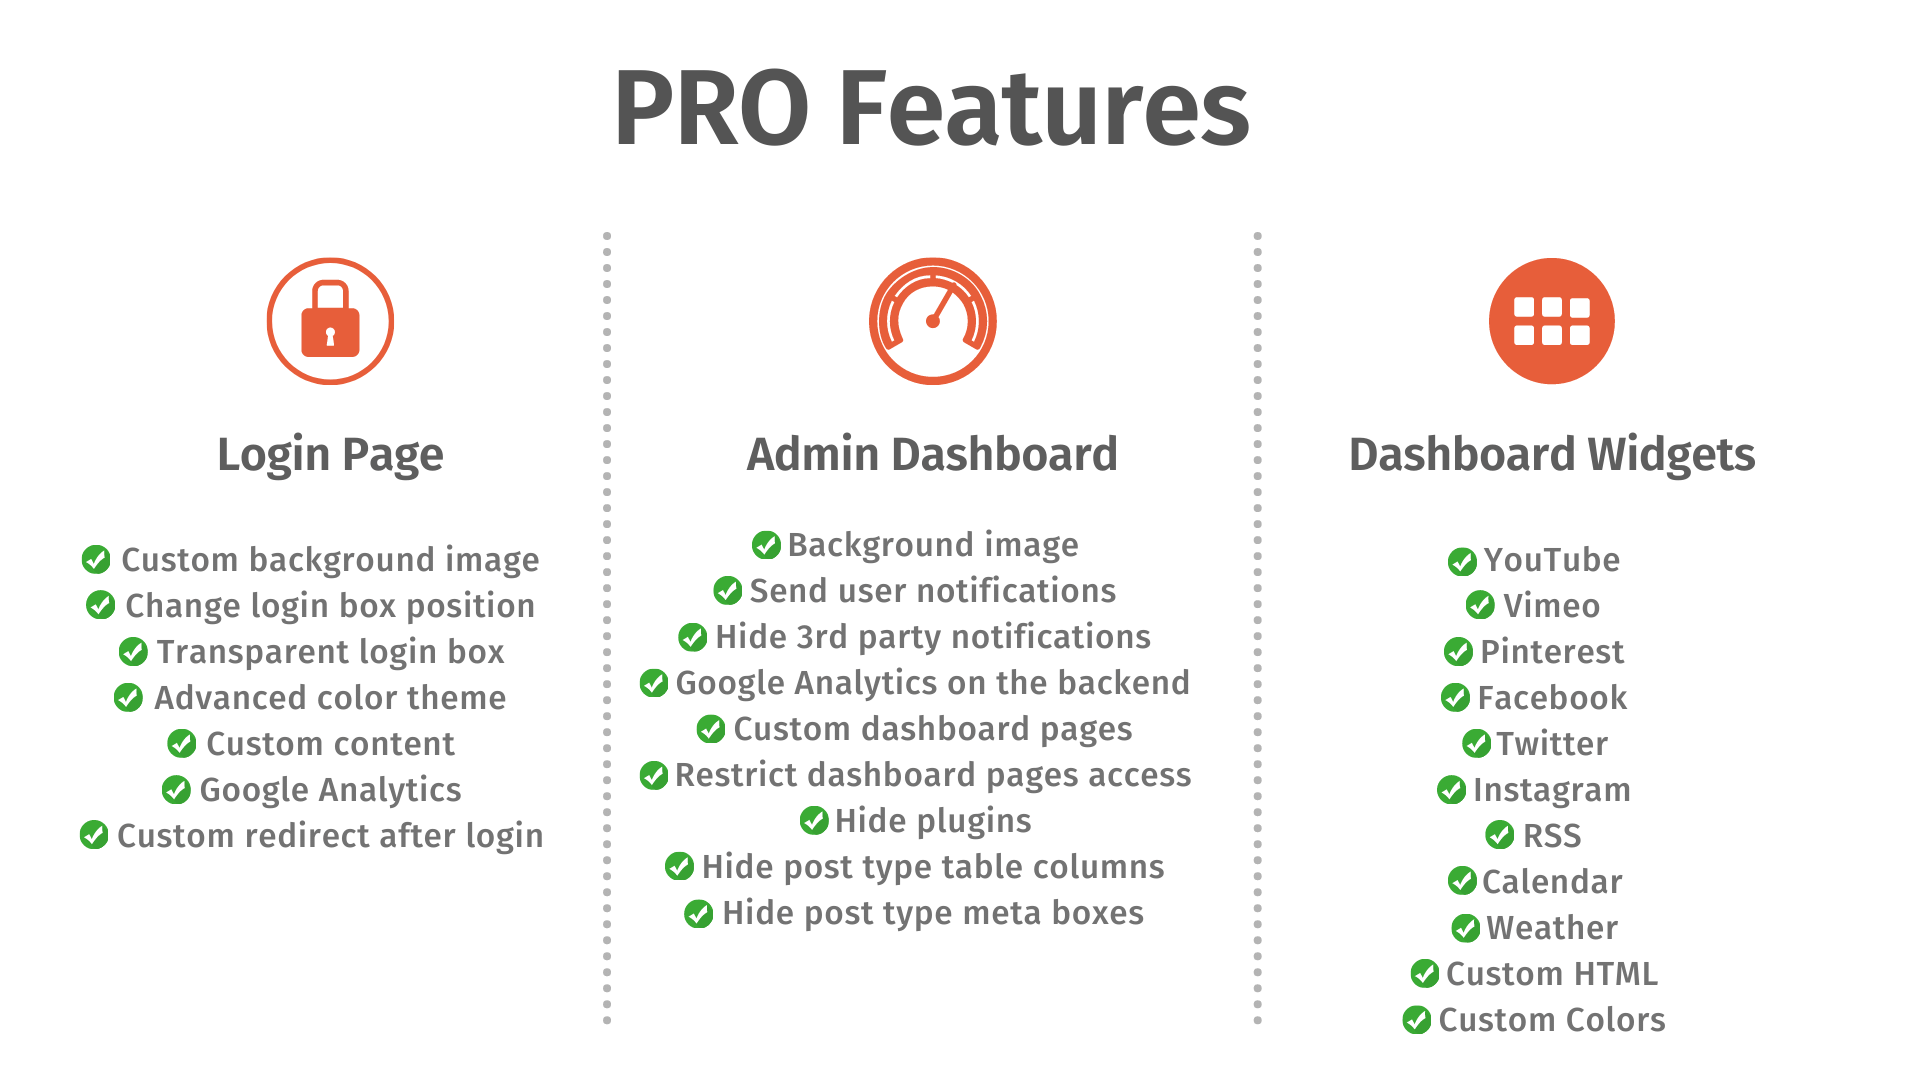 PRO Features